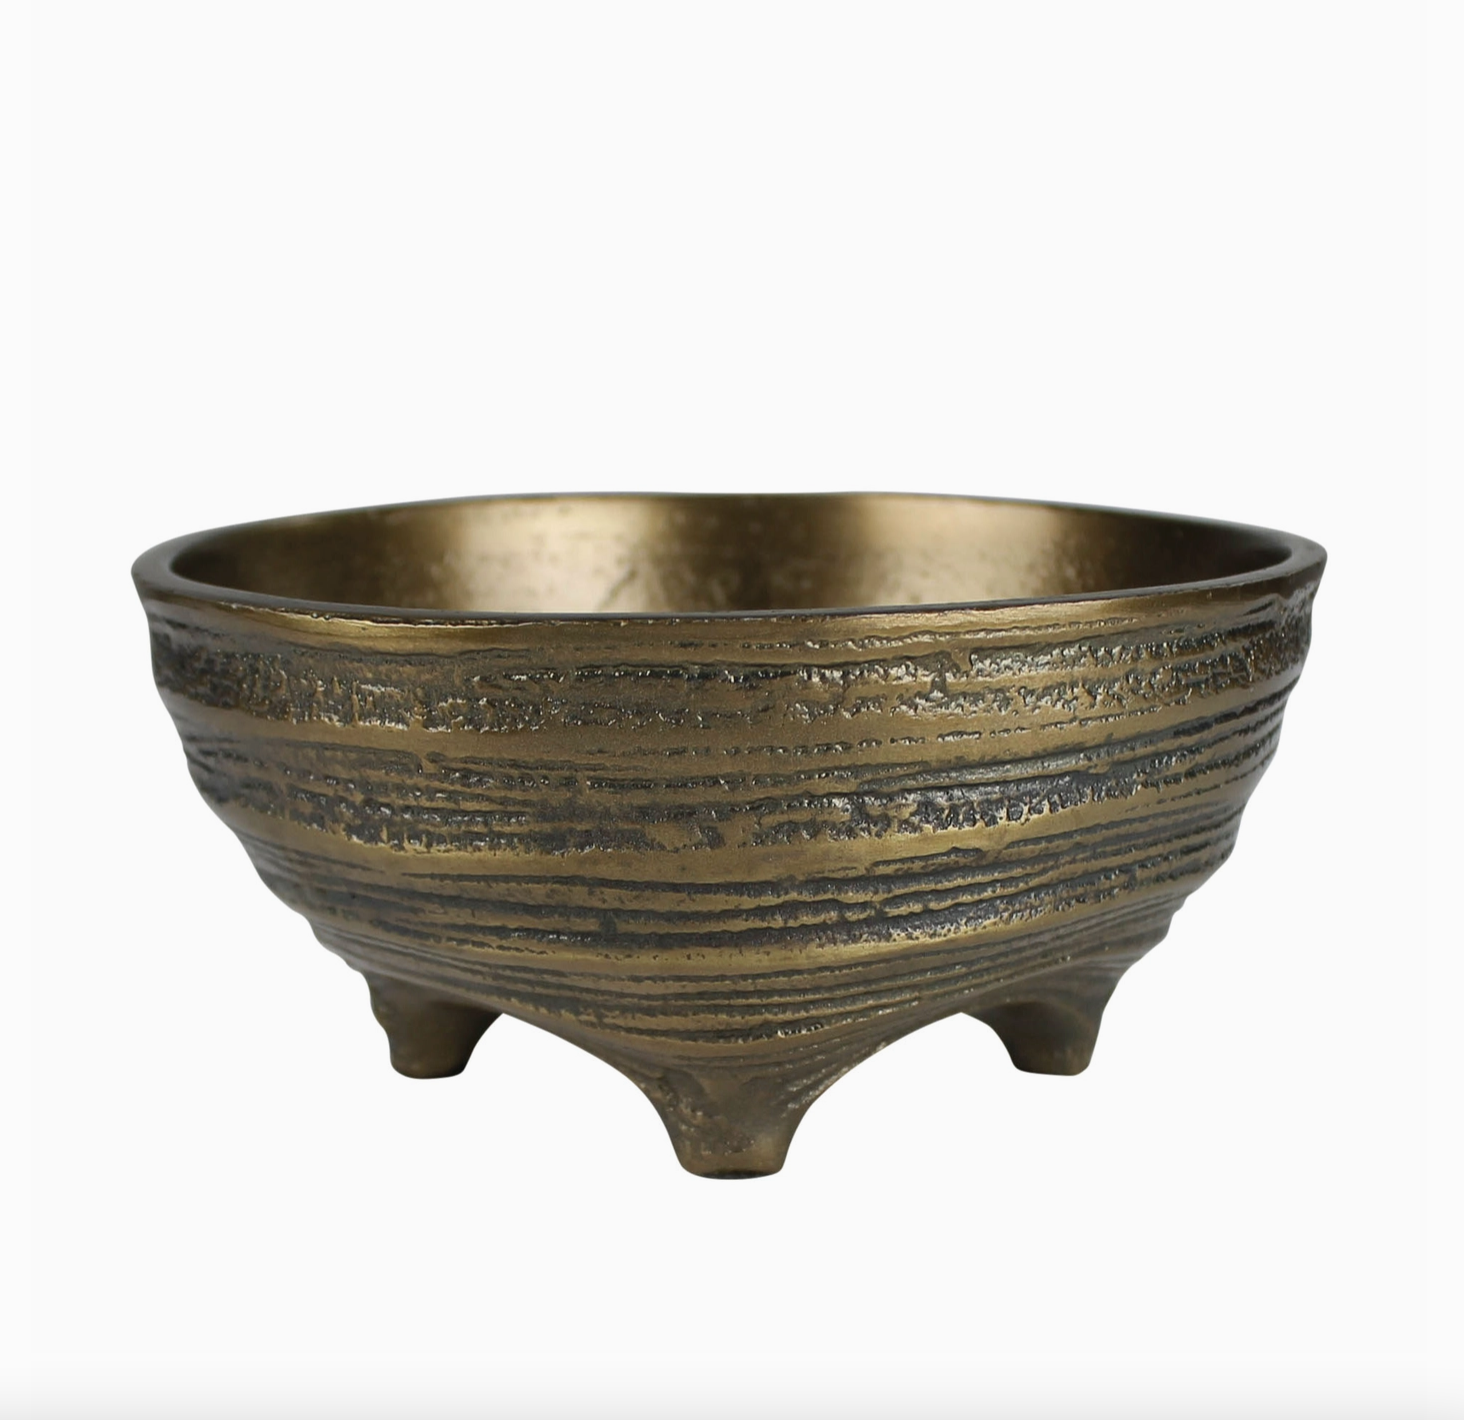 A Cleary Bowl Brass Small with three small legs, featuring a detailed, patterned exterior and a smooth interior, isolated on a white background in Scottsdale Arizona.